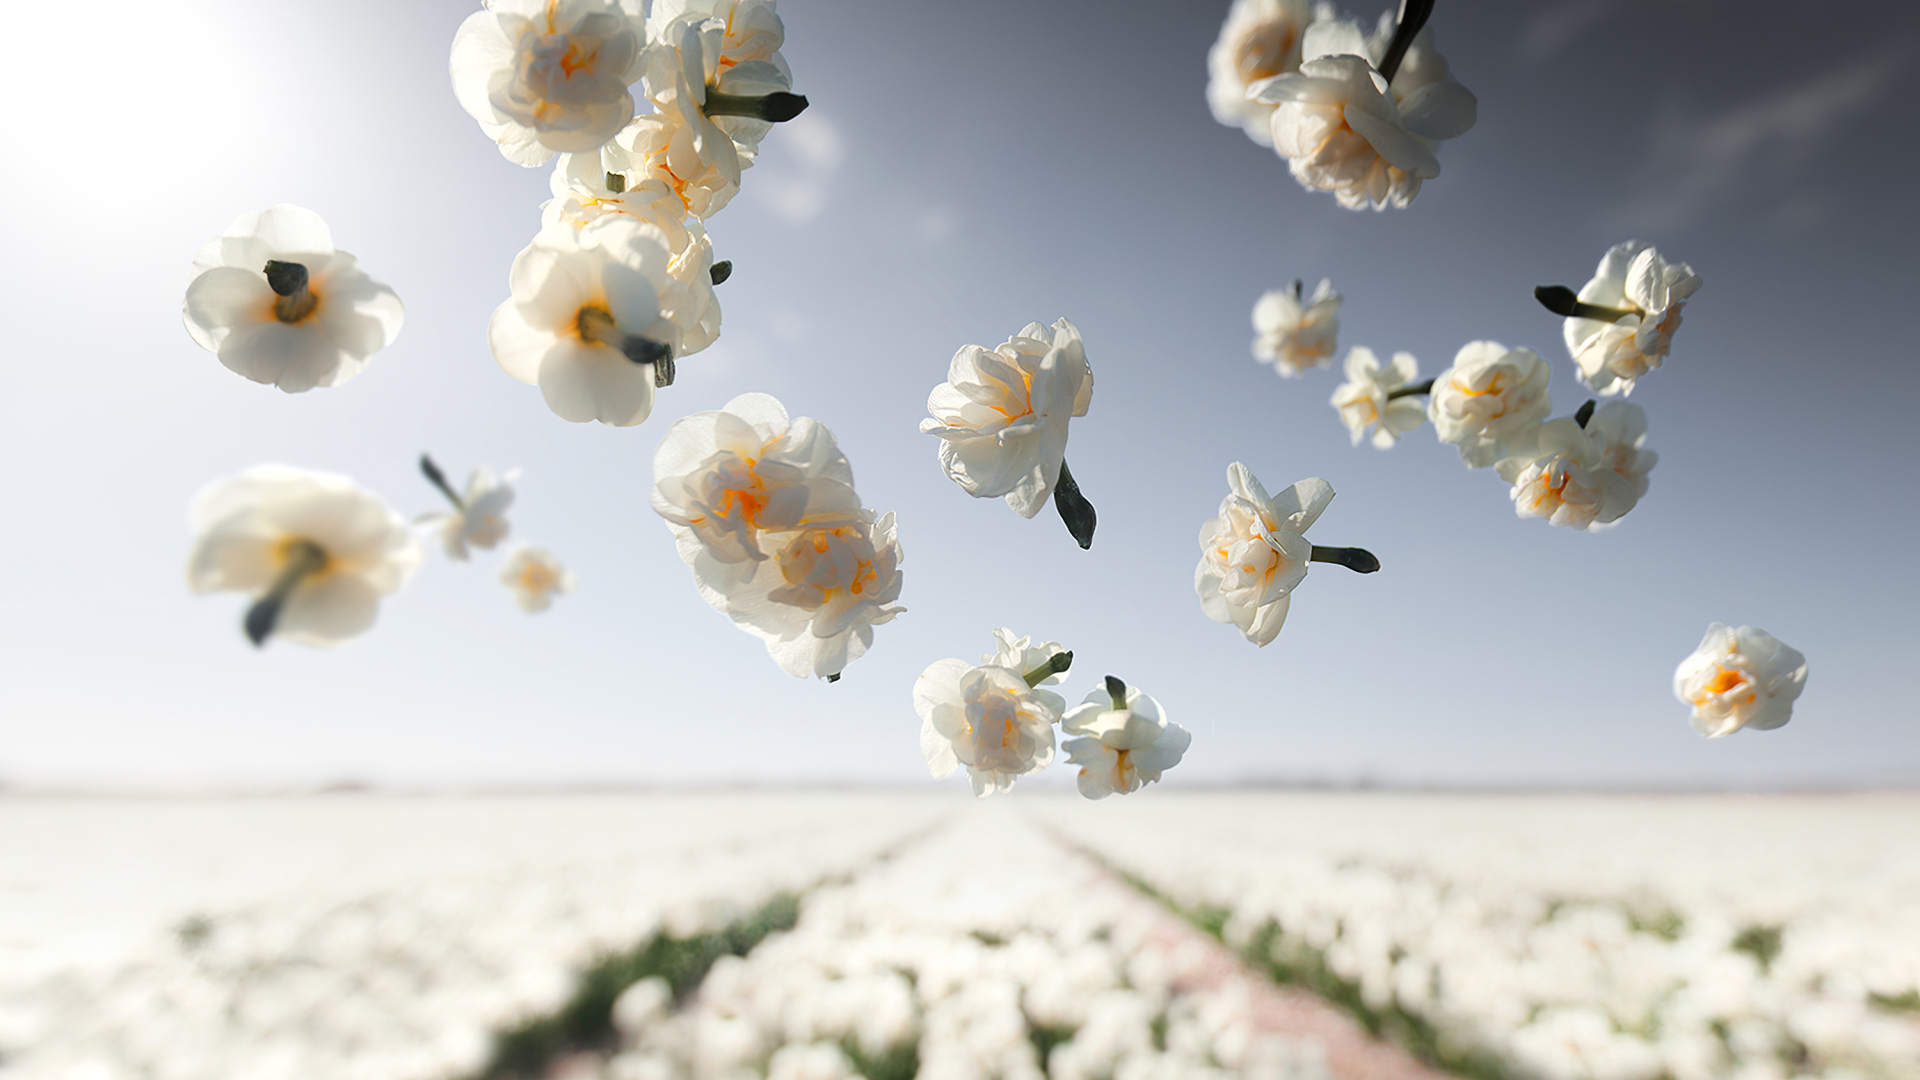 White narcissus flowers fly over the field